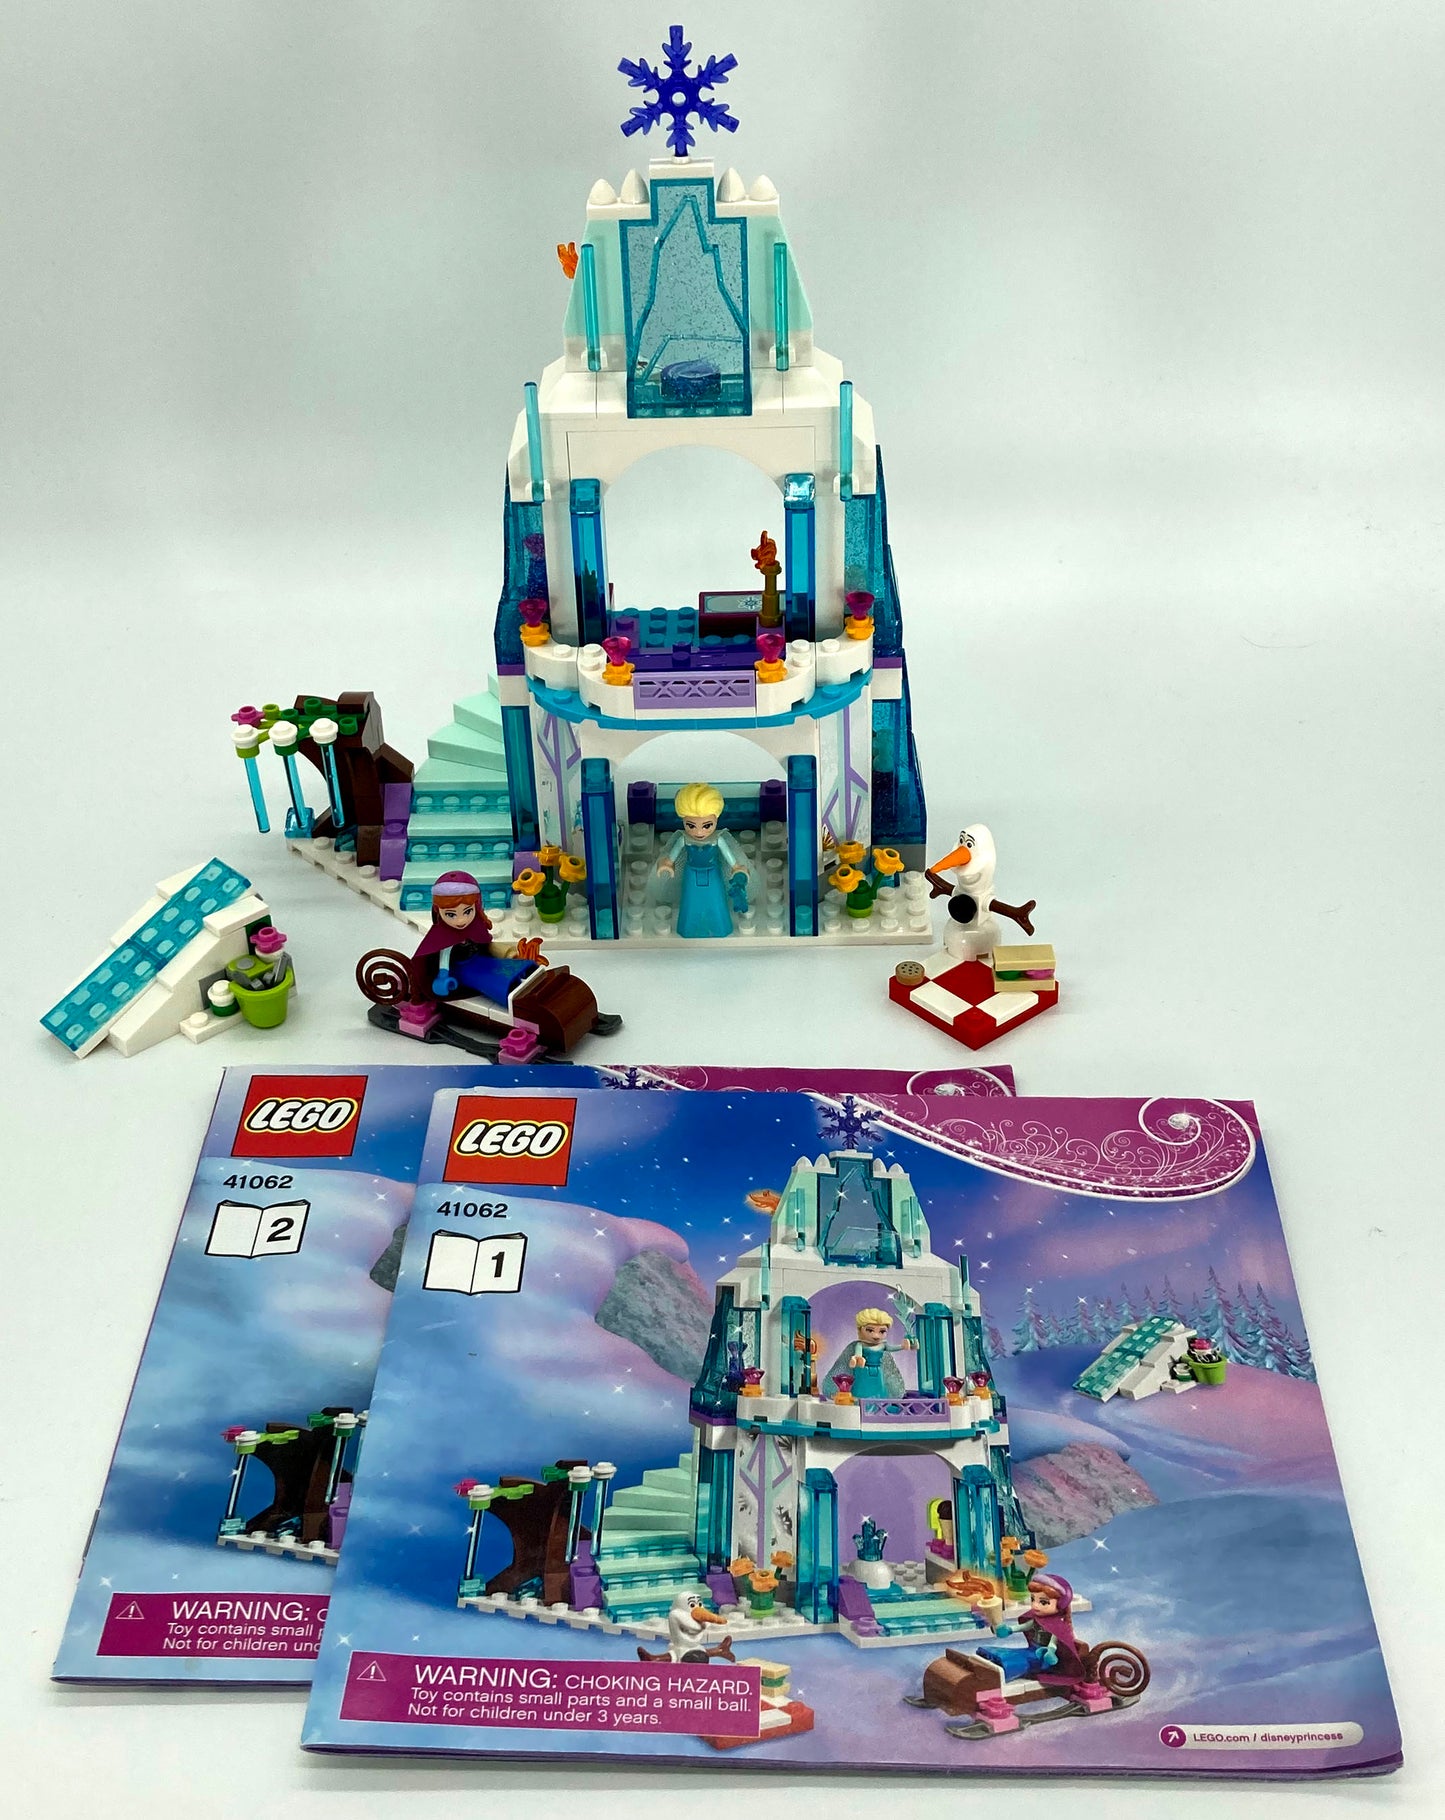 Used Set 41062 Elsa's Sparkling Ice Castle (with Instruction Manuals, No Box)